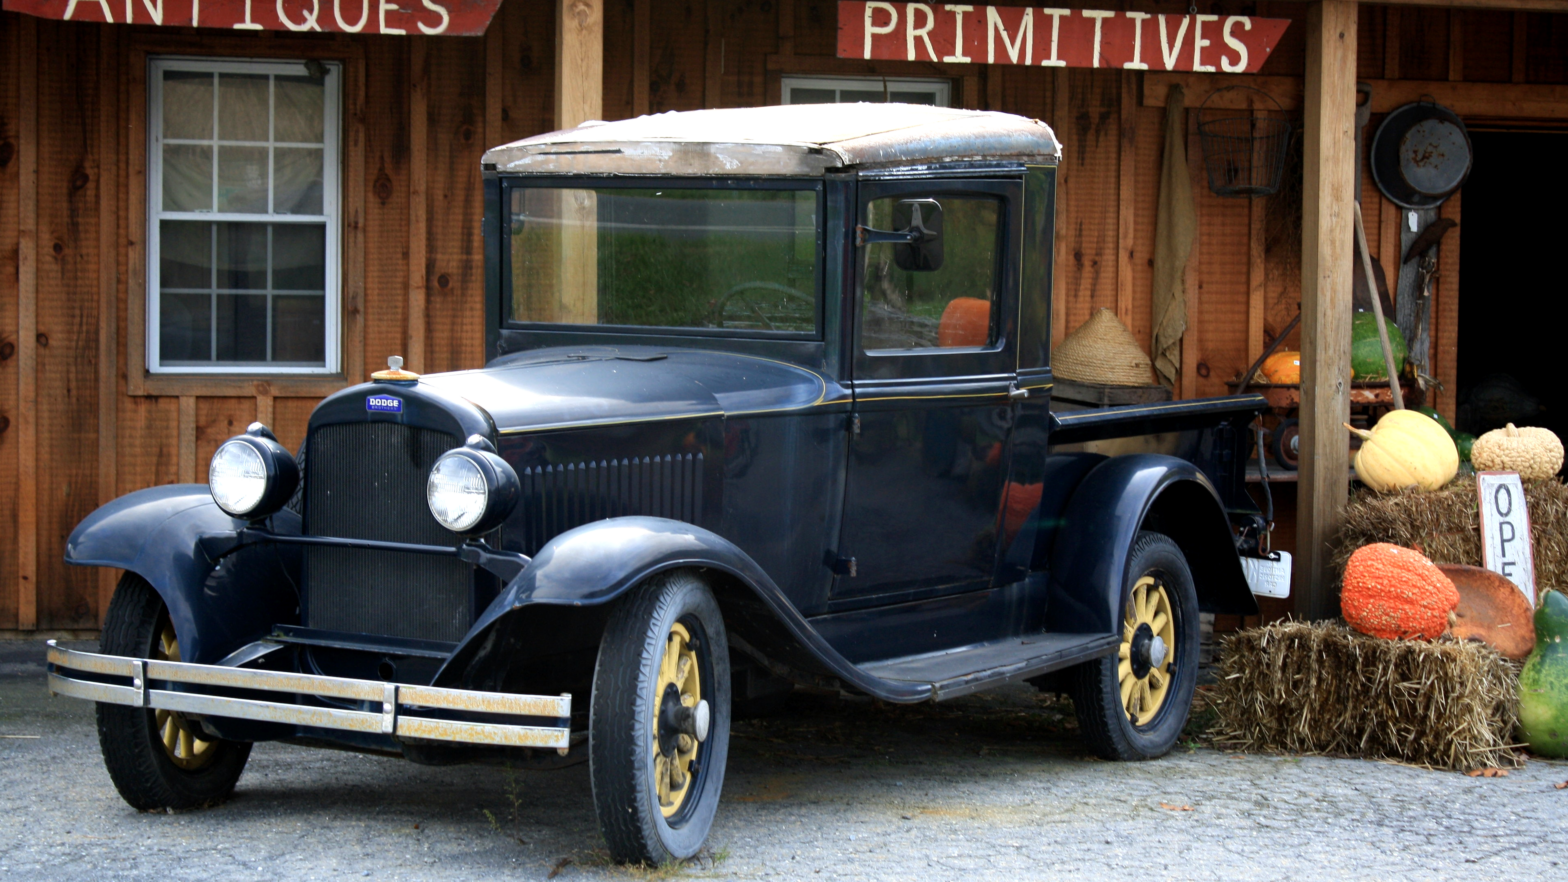 Restoring the Quiet Strength of a 1929 Dodge Truck